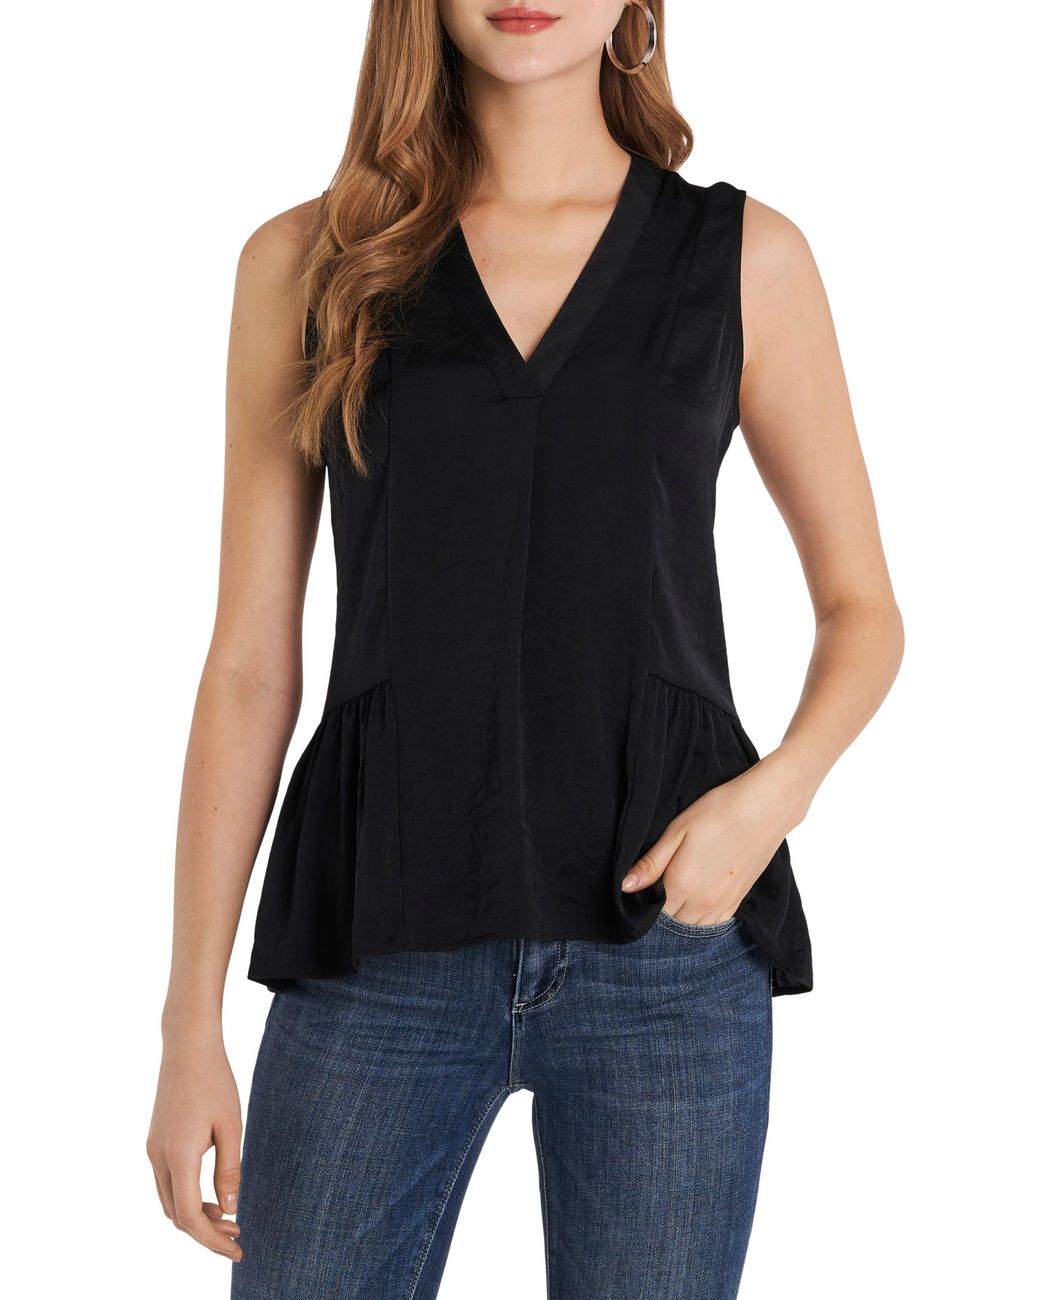 Vince Camuto Sleeveless Rumple Ruffle Blouse in Black - Lyst